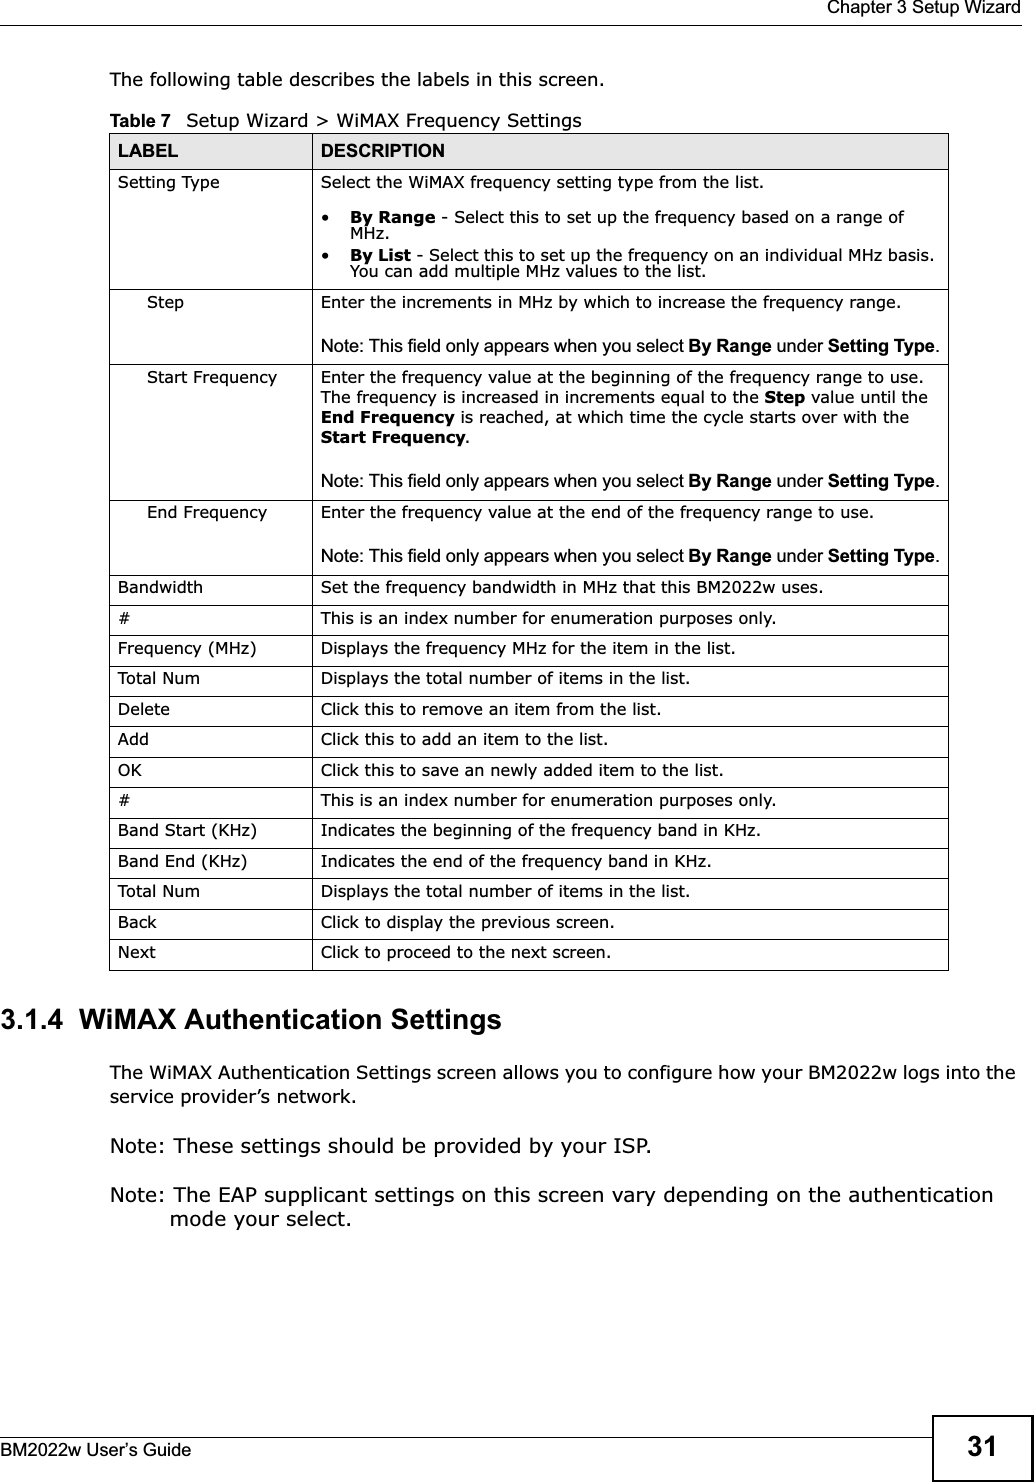  Chapter 3 Setup WizardBM2022w User’s Guide 31The following table describes the labels in this screen.3.1.4  WiMAX Authentication SettingsThe WiMAX Authentication Settings screen allows you to configure how your BM2022w logs into the service provider’s network.Note: These settings should be provided by your ISP.Note: The EAP supplicant settings on this screen vary depending on the authentication mode your select.Table 7   Setup Wizard &gt; WiMAX Frequency SettingsLABEL DESCRIPTIONSetting Type Select the WiMAX frequency setting type from the list.•By Range - Select this to set up the frequency based on a range of MHz.•By List - Select this to set up the frequency on an individual MHz basis. You can add multiple MHz values to the list.Step Enter the increments in MHz by which to increase the frequency range.Note: This field only appears when you select By Range under Setting Type.Start Frequency Enter the frequency value at the beginning of the frequency range to use. The frequency is increased in increments equal to the Step value until the End Frequency is reached, at which time the cycle starts over with the Start Frequency.Note: This field only appears when you select By Range under Setting Type.End Frequency Enter the frequency value at the end of the frequency range to use. Note: This field only appears when you select By Range under Setting Type.Bandwidth Set the frequency bandwidth in MHz that this BM2022w uses.# This is an index number for enumeration purposes only.Frequency (MHz) Displays the frequency MHz for the item in the list.Total Num Displays the total number of items in the list.Delete Click this to remove an item from the list.Add Click this to add an item to the list.OK Click this to save an newly added item to the list.# This is an index number for enumeration purposes only.Band Start (KHz) Indicates the beginning of the frequency band in KHz.Band End (KHz) Indicates the end of the frequency band in KHz.Total Num Displays the total number of items in the list.Back Click to display the previous screen.Next Click to proceed to the next screen.